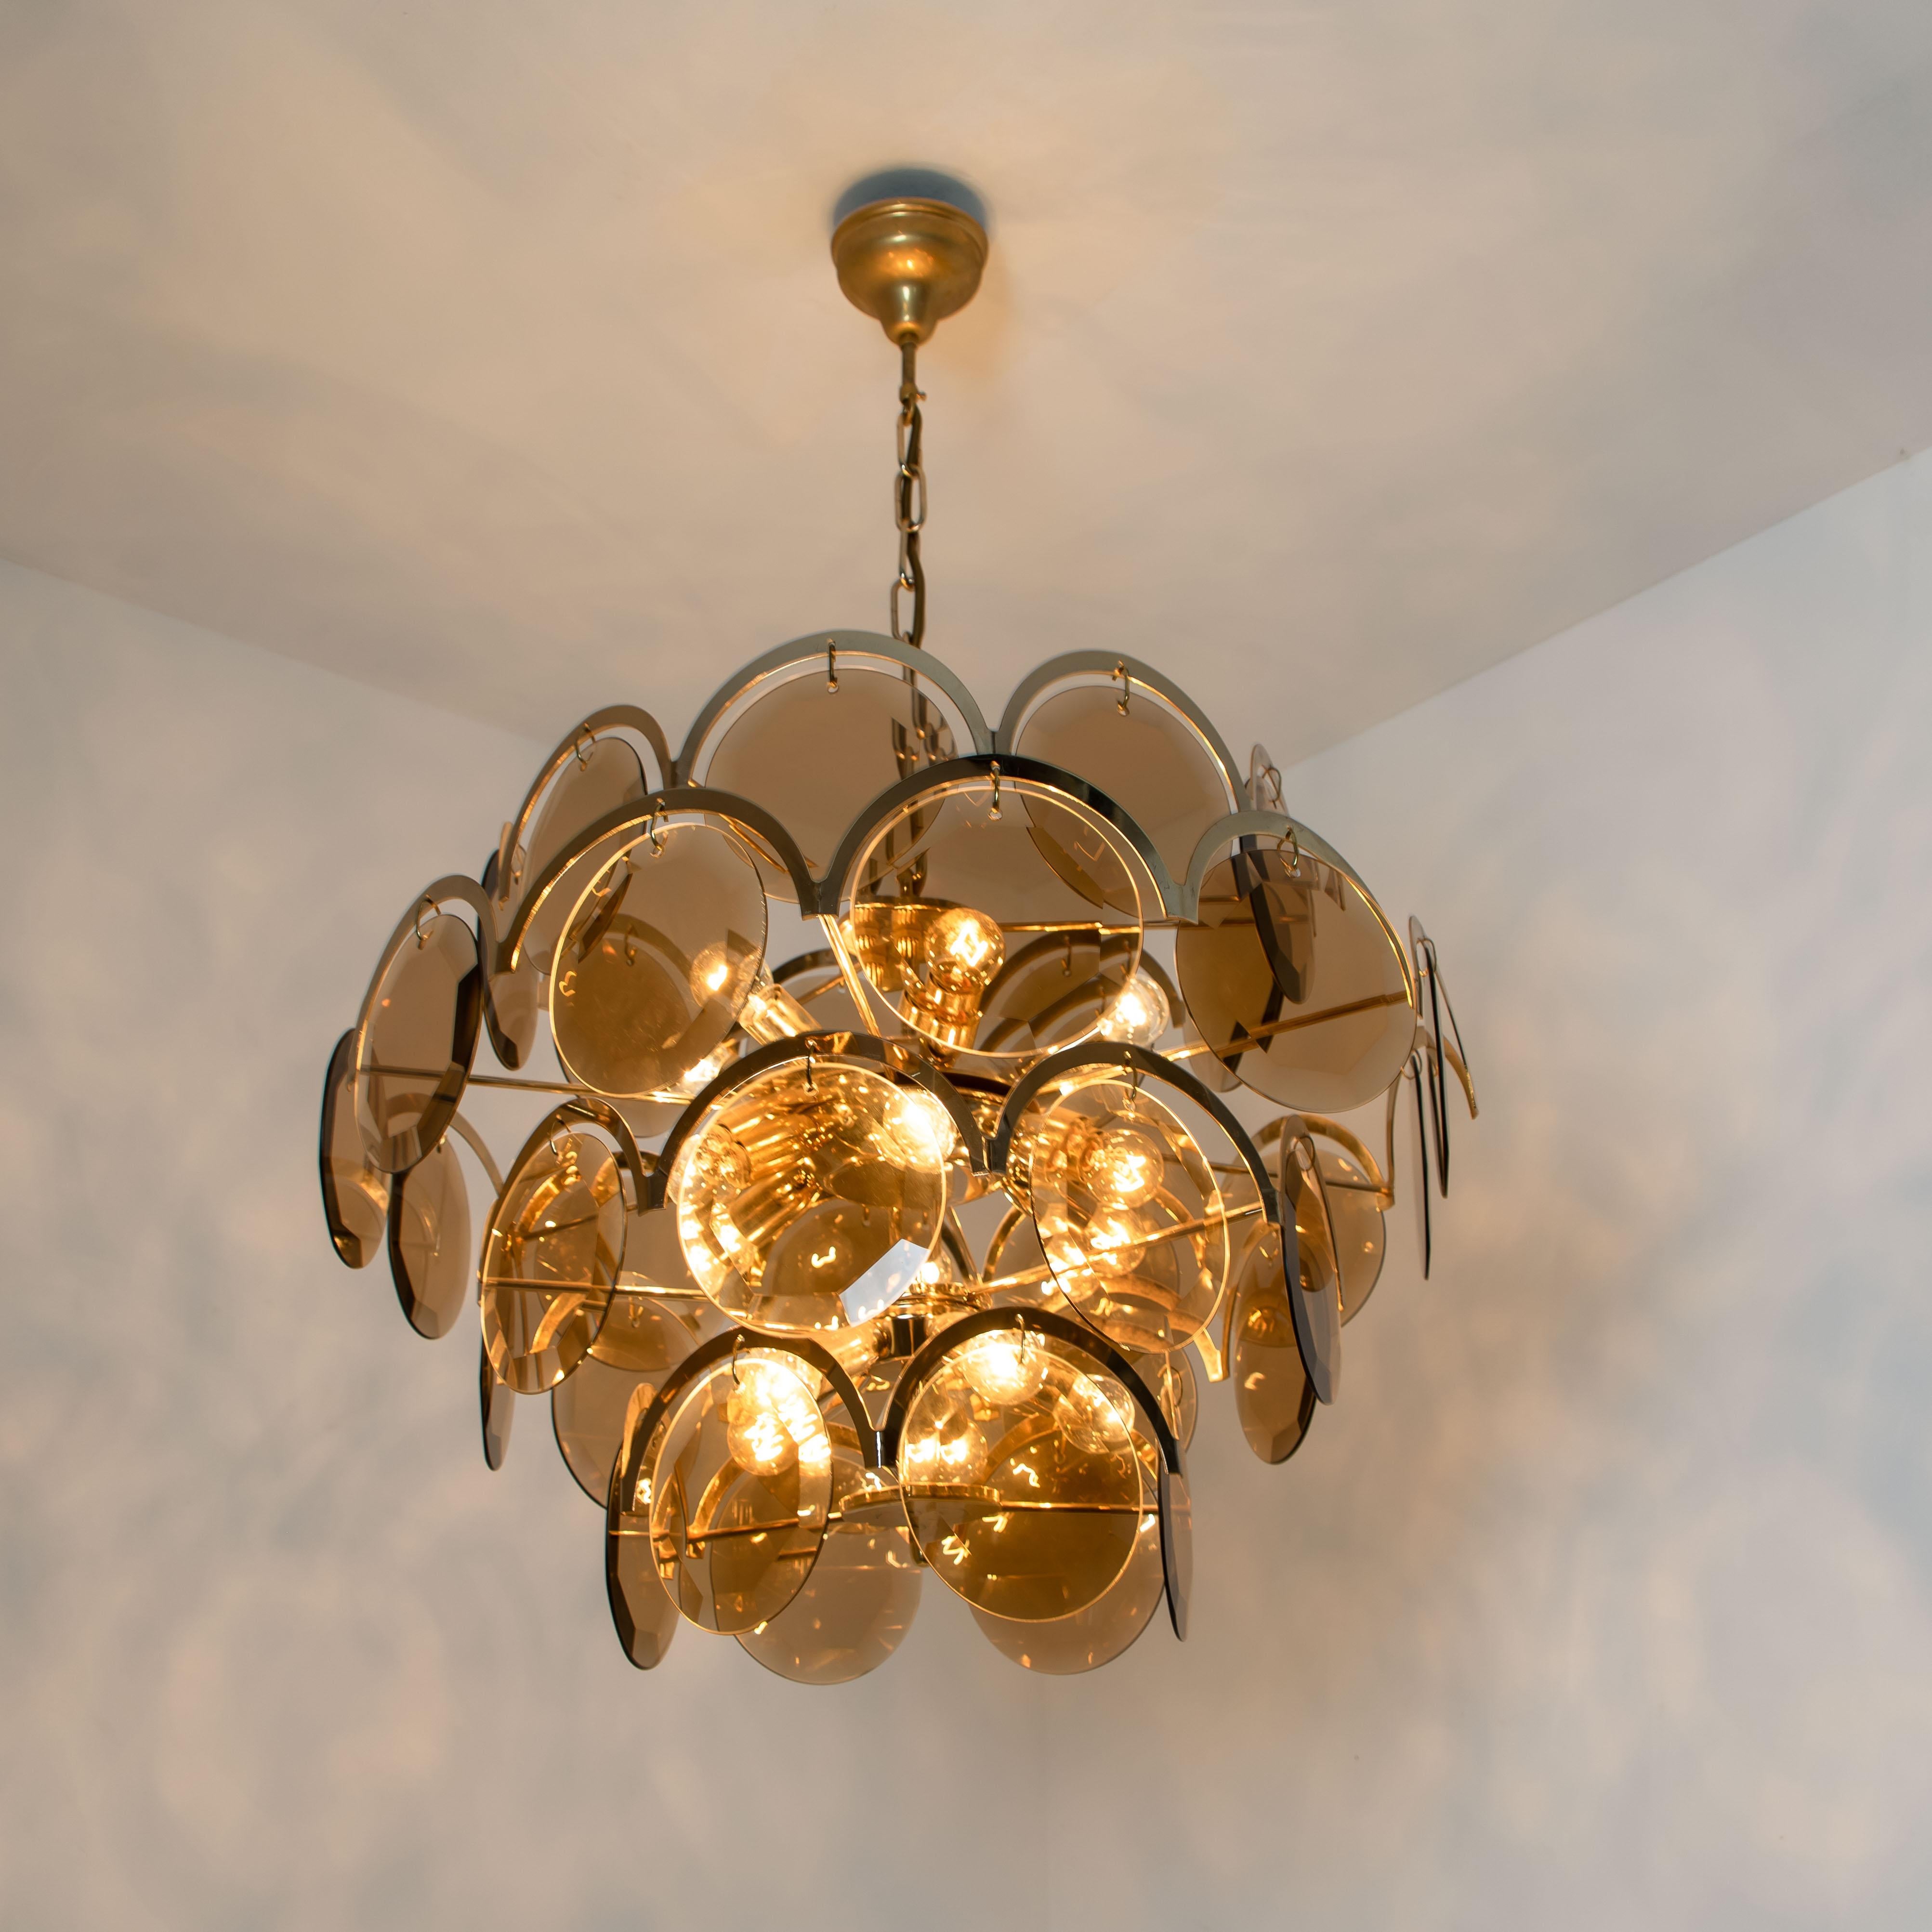 Large Smoked Glass and Brass Chandelier in the Style of Vistosi, Italy For Sale 7